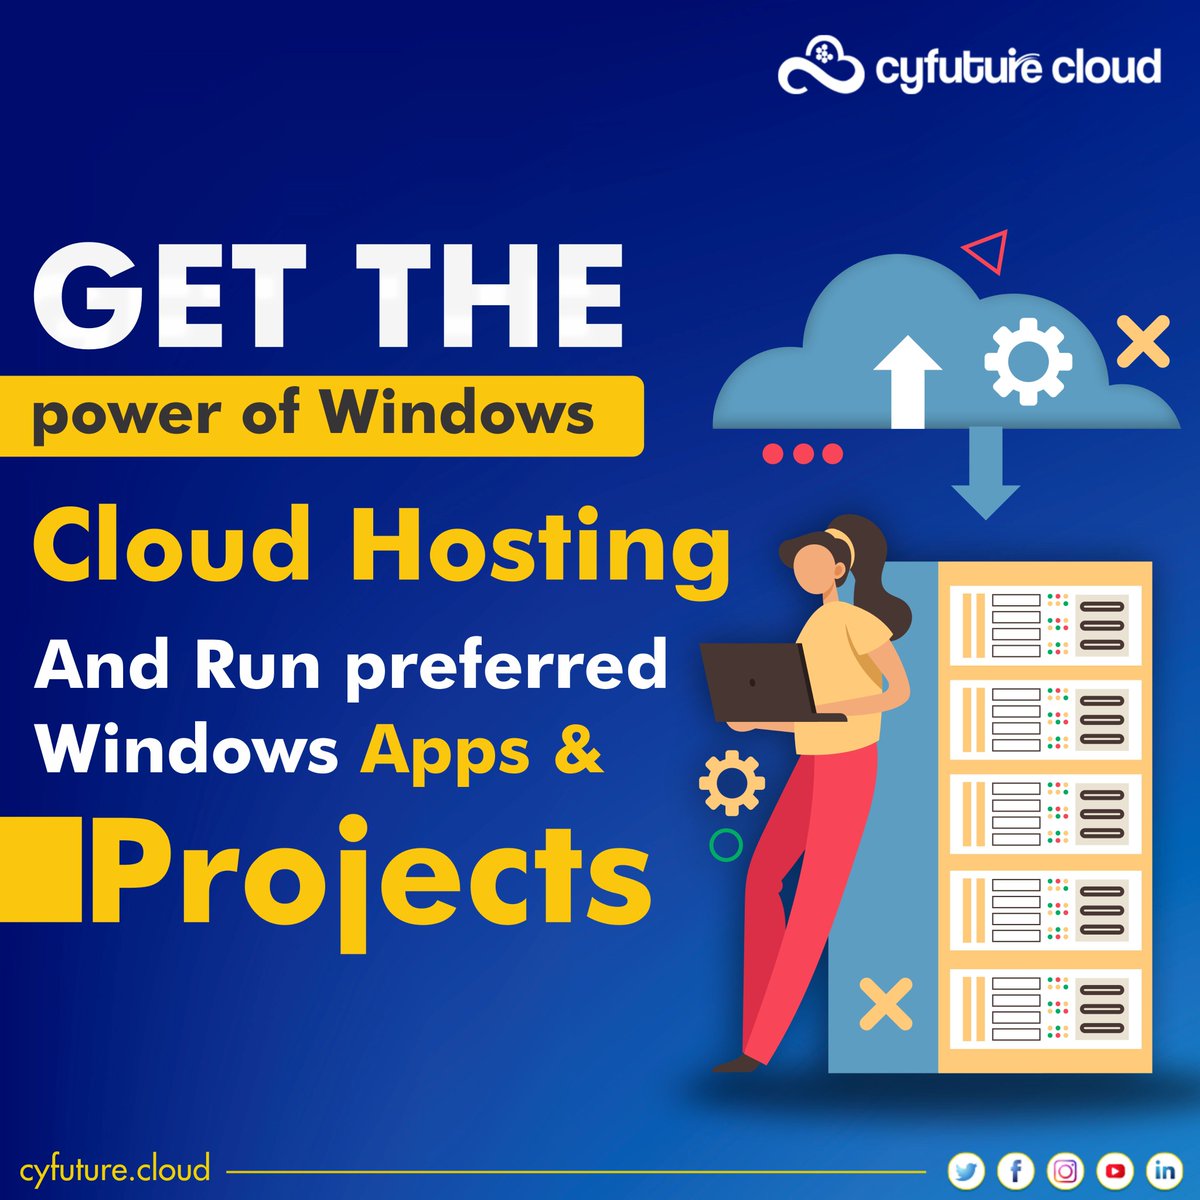 Get a highly reliable Windows Cloud Server Hosting.
Cyfuture cloud's Windows-based Clouds & Servers deliver a powerful desktop experience with just a web browser.
cyfuture.cloud

#cyfuturecloud #cloud_computing #cloud #cloudcomputing #cloudlife #cloudsecurity